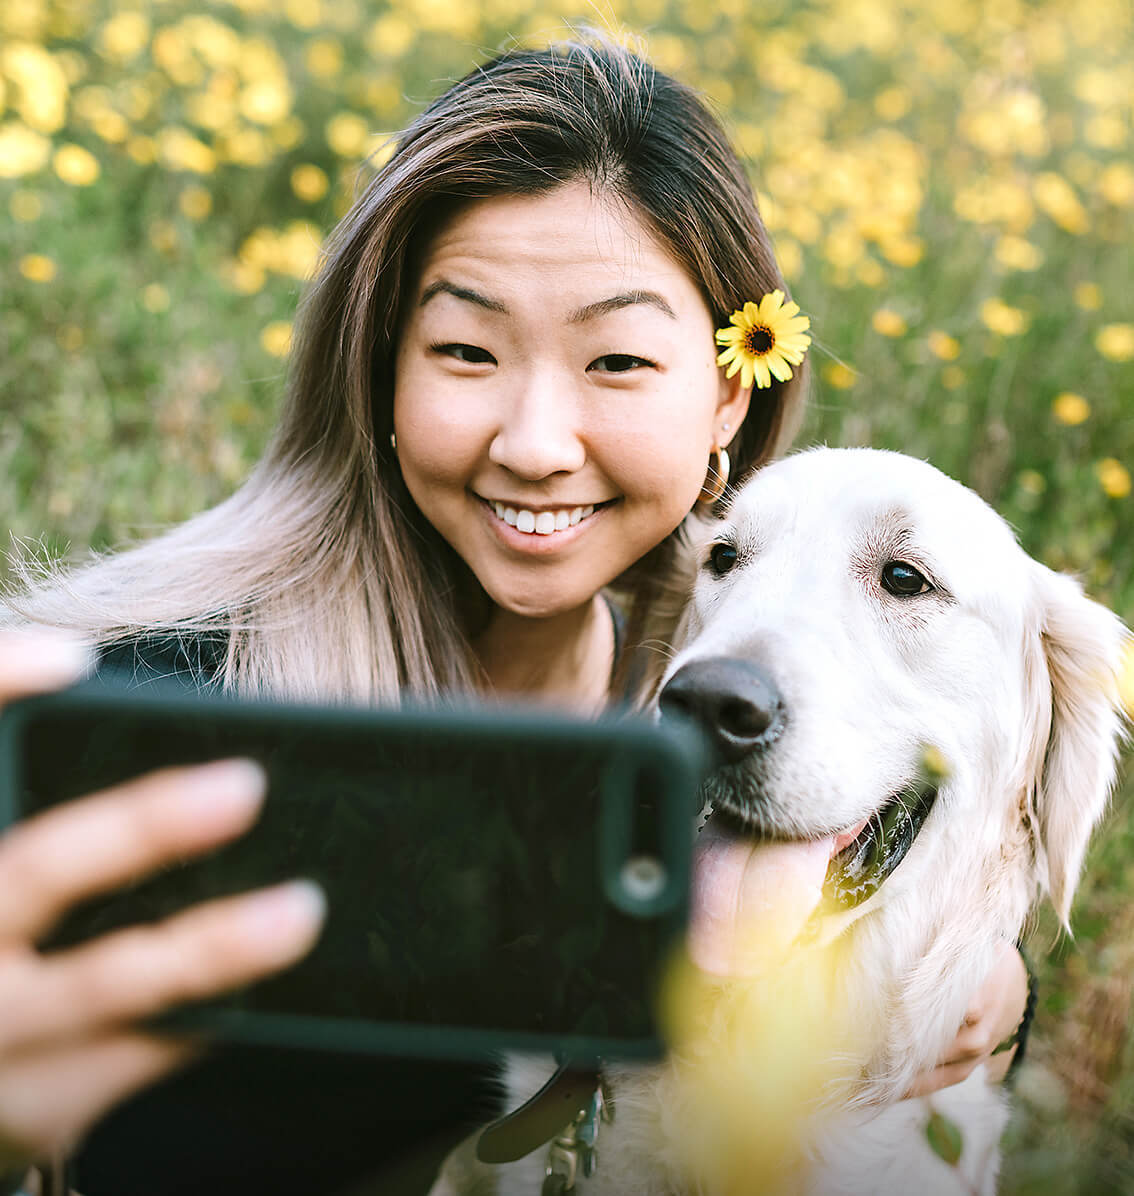 woman taking a photo with a golden retriever outdoors